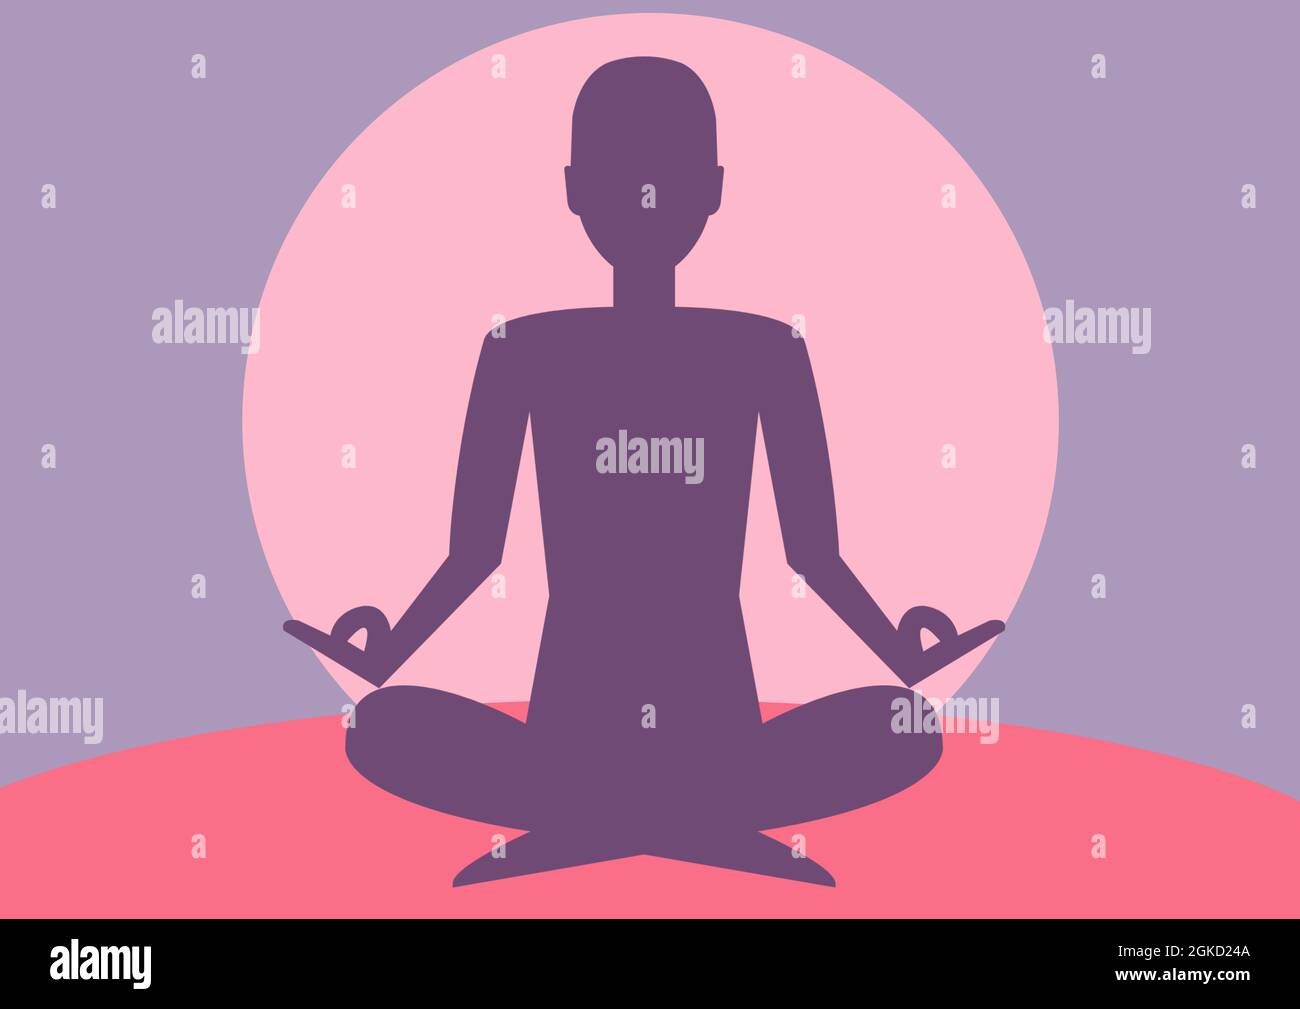 Silhouette of man meditating icon over round pink banner against purple background Stock Photo